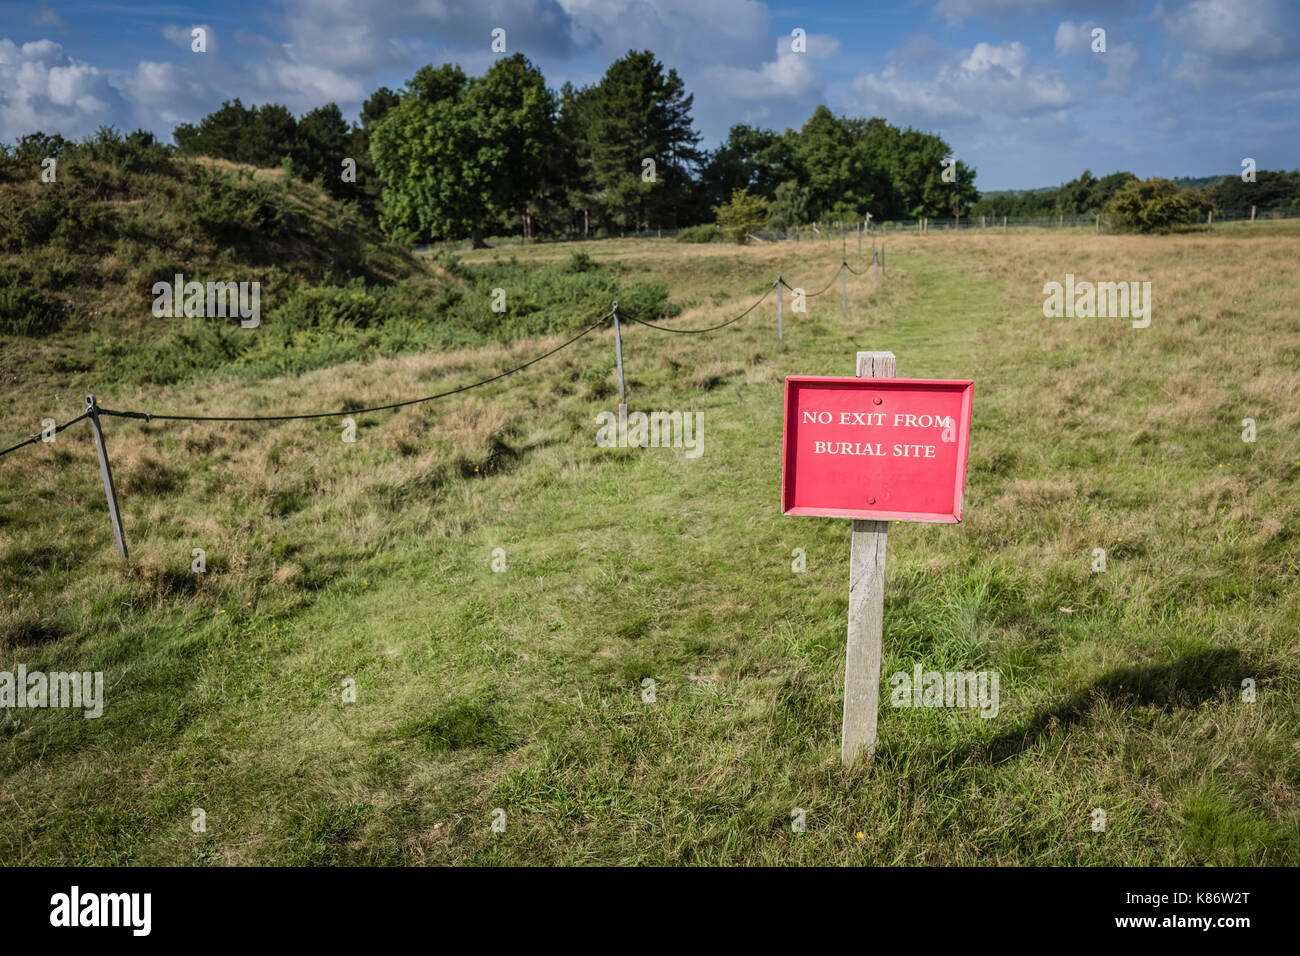 Unintentional silly sign spotted in ancient burial ground. Stock Photo